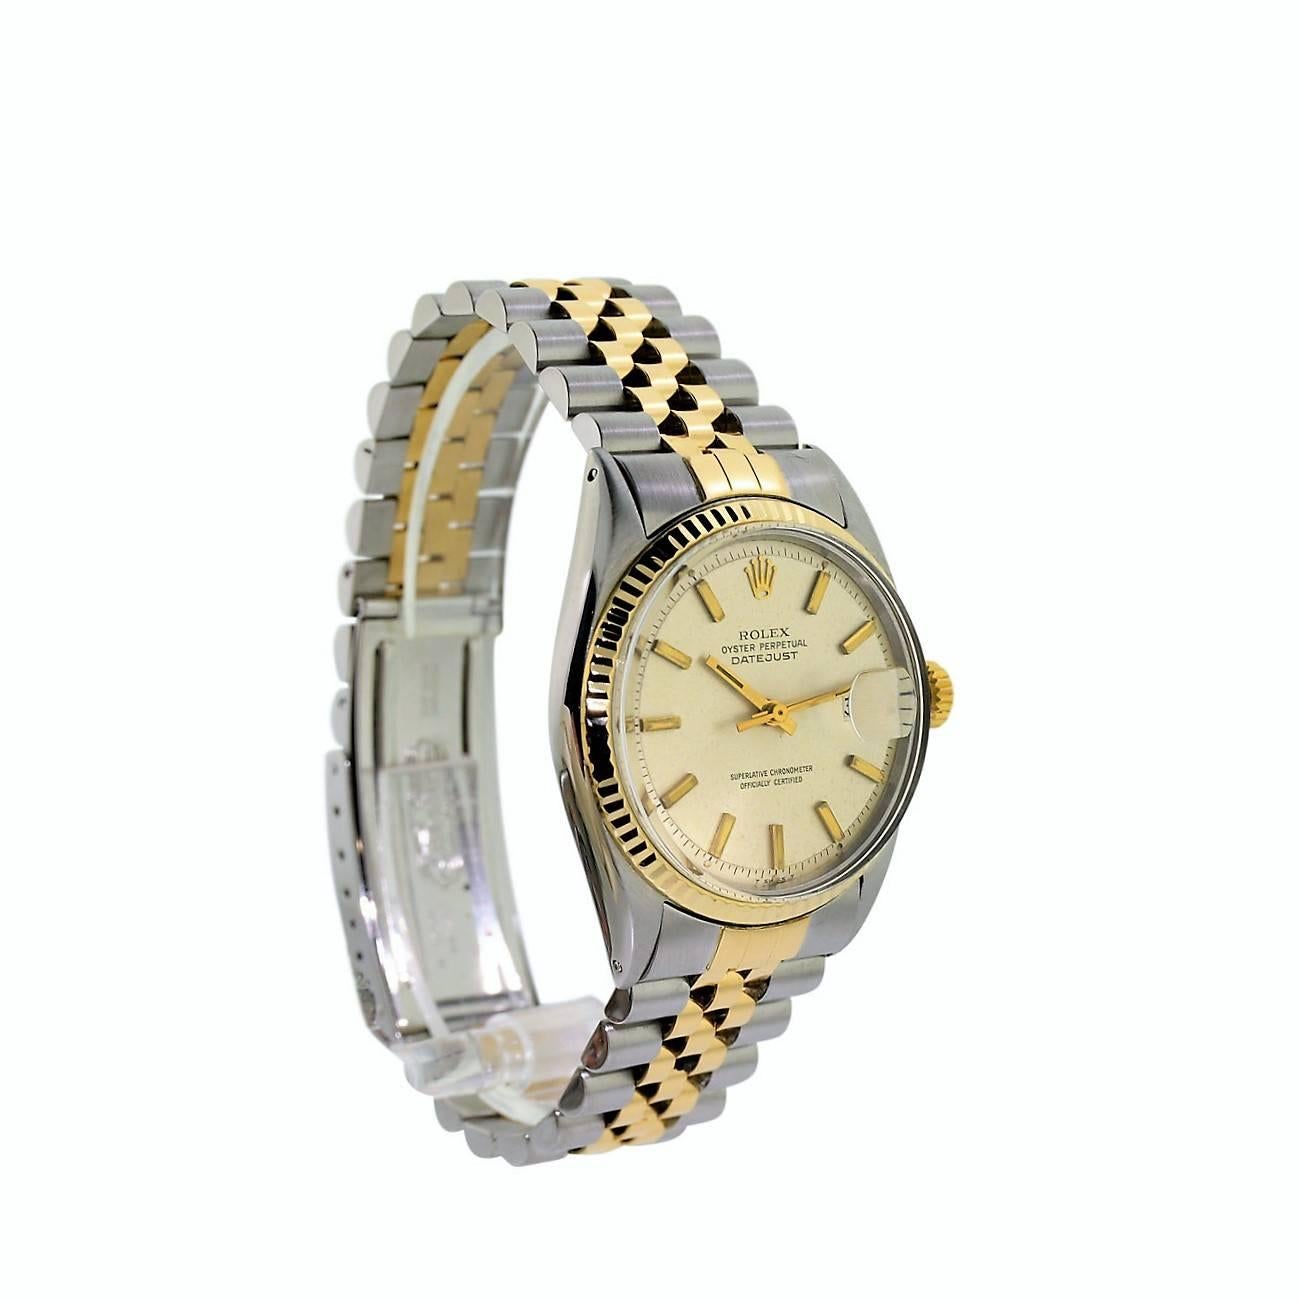 FACTORY / HOUSE: Rolex Watch Company
STYLE / REFERENCE: Datejust /  1601
METAL / MATERIAL: Stainless Steel / 18Kt. Yellow Gold
DIMENSIONS:  43mm  X  36mm
CIRCA: 1970 / 71
MOVEMENT / CALIBER: Perpetual Winding /  26 Jewels / Cal. 1570
DIAL / HANDS: